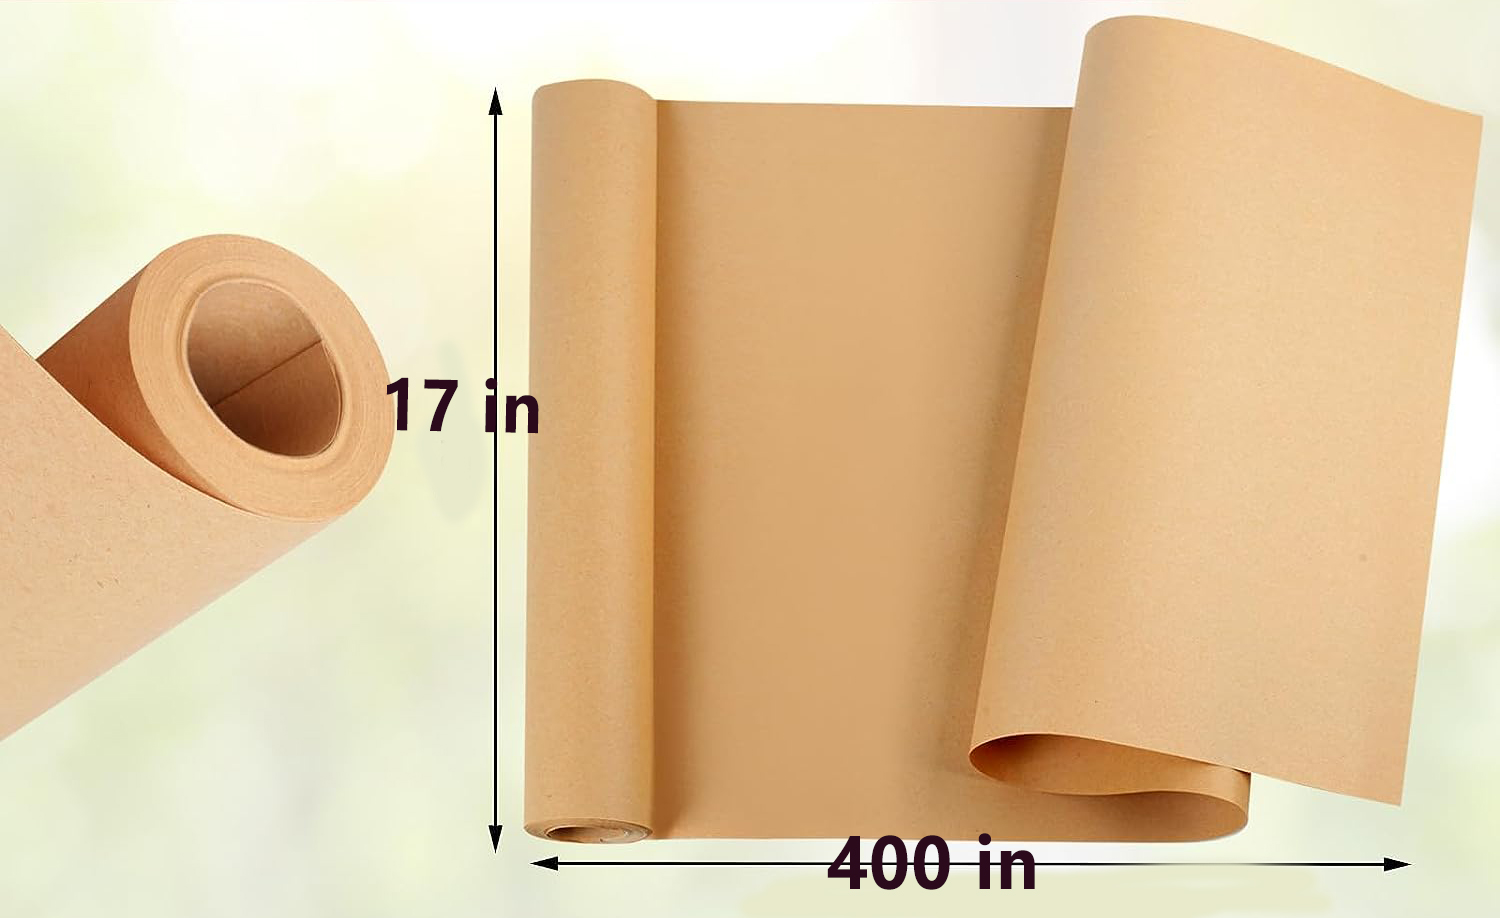 Kraft Paper Roll 17400, White Wrapping Paper, Craft Paper, Packing Paper  for Moving,Gift Wrapping, Wall Art, Table Runner, Floor Covering(White) 